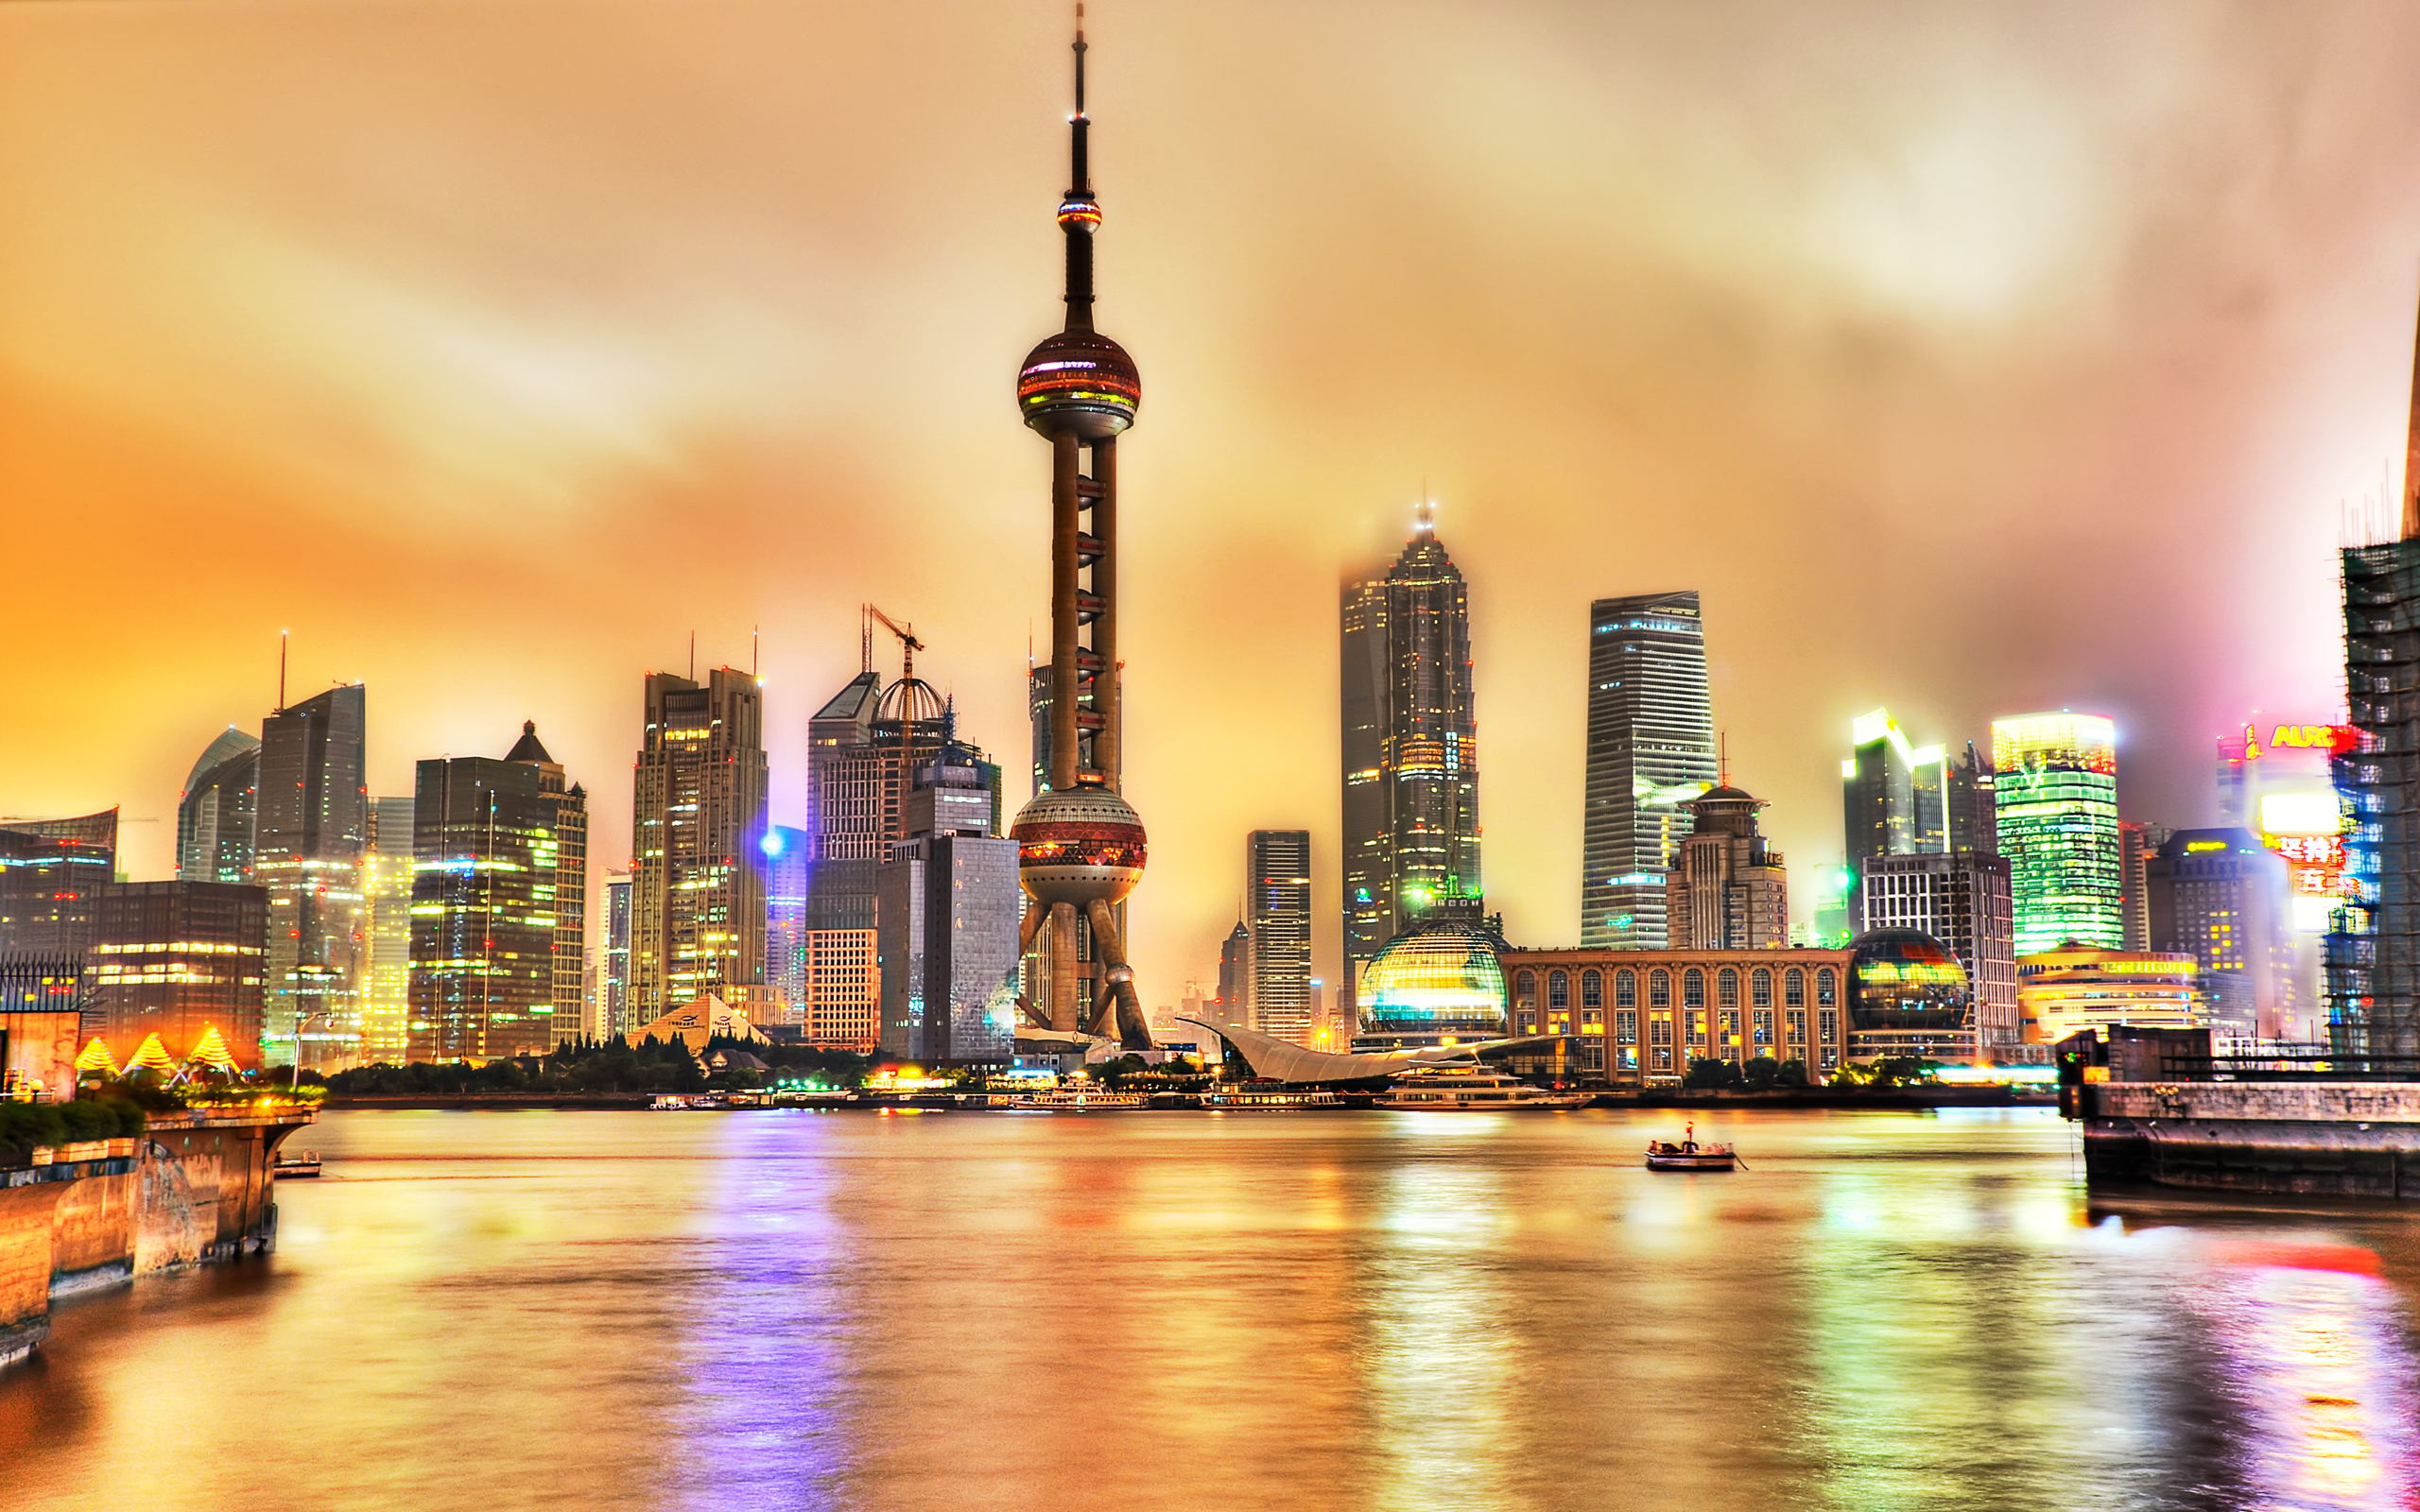 shanghai, China, Cities, Cityscapes, Architecture, Buildinds, Skyscrapers, Hdr, Reflection, Water, Sky, Clouds, Night, Lights Wallpaper